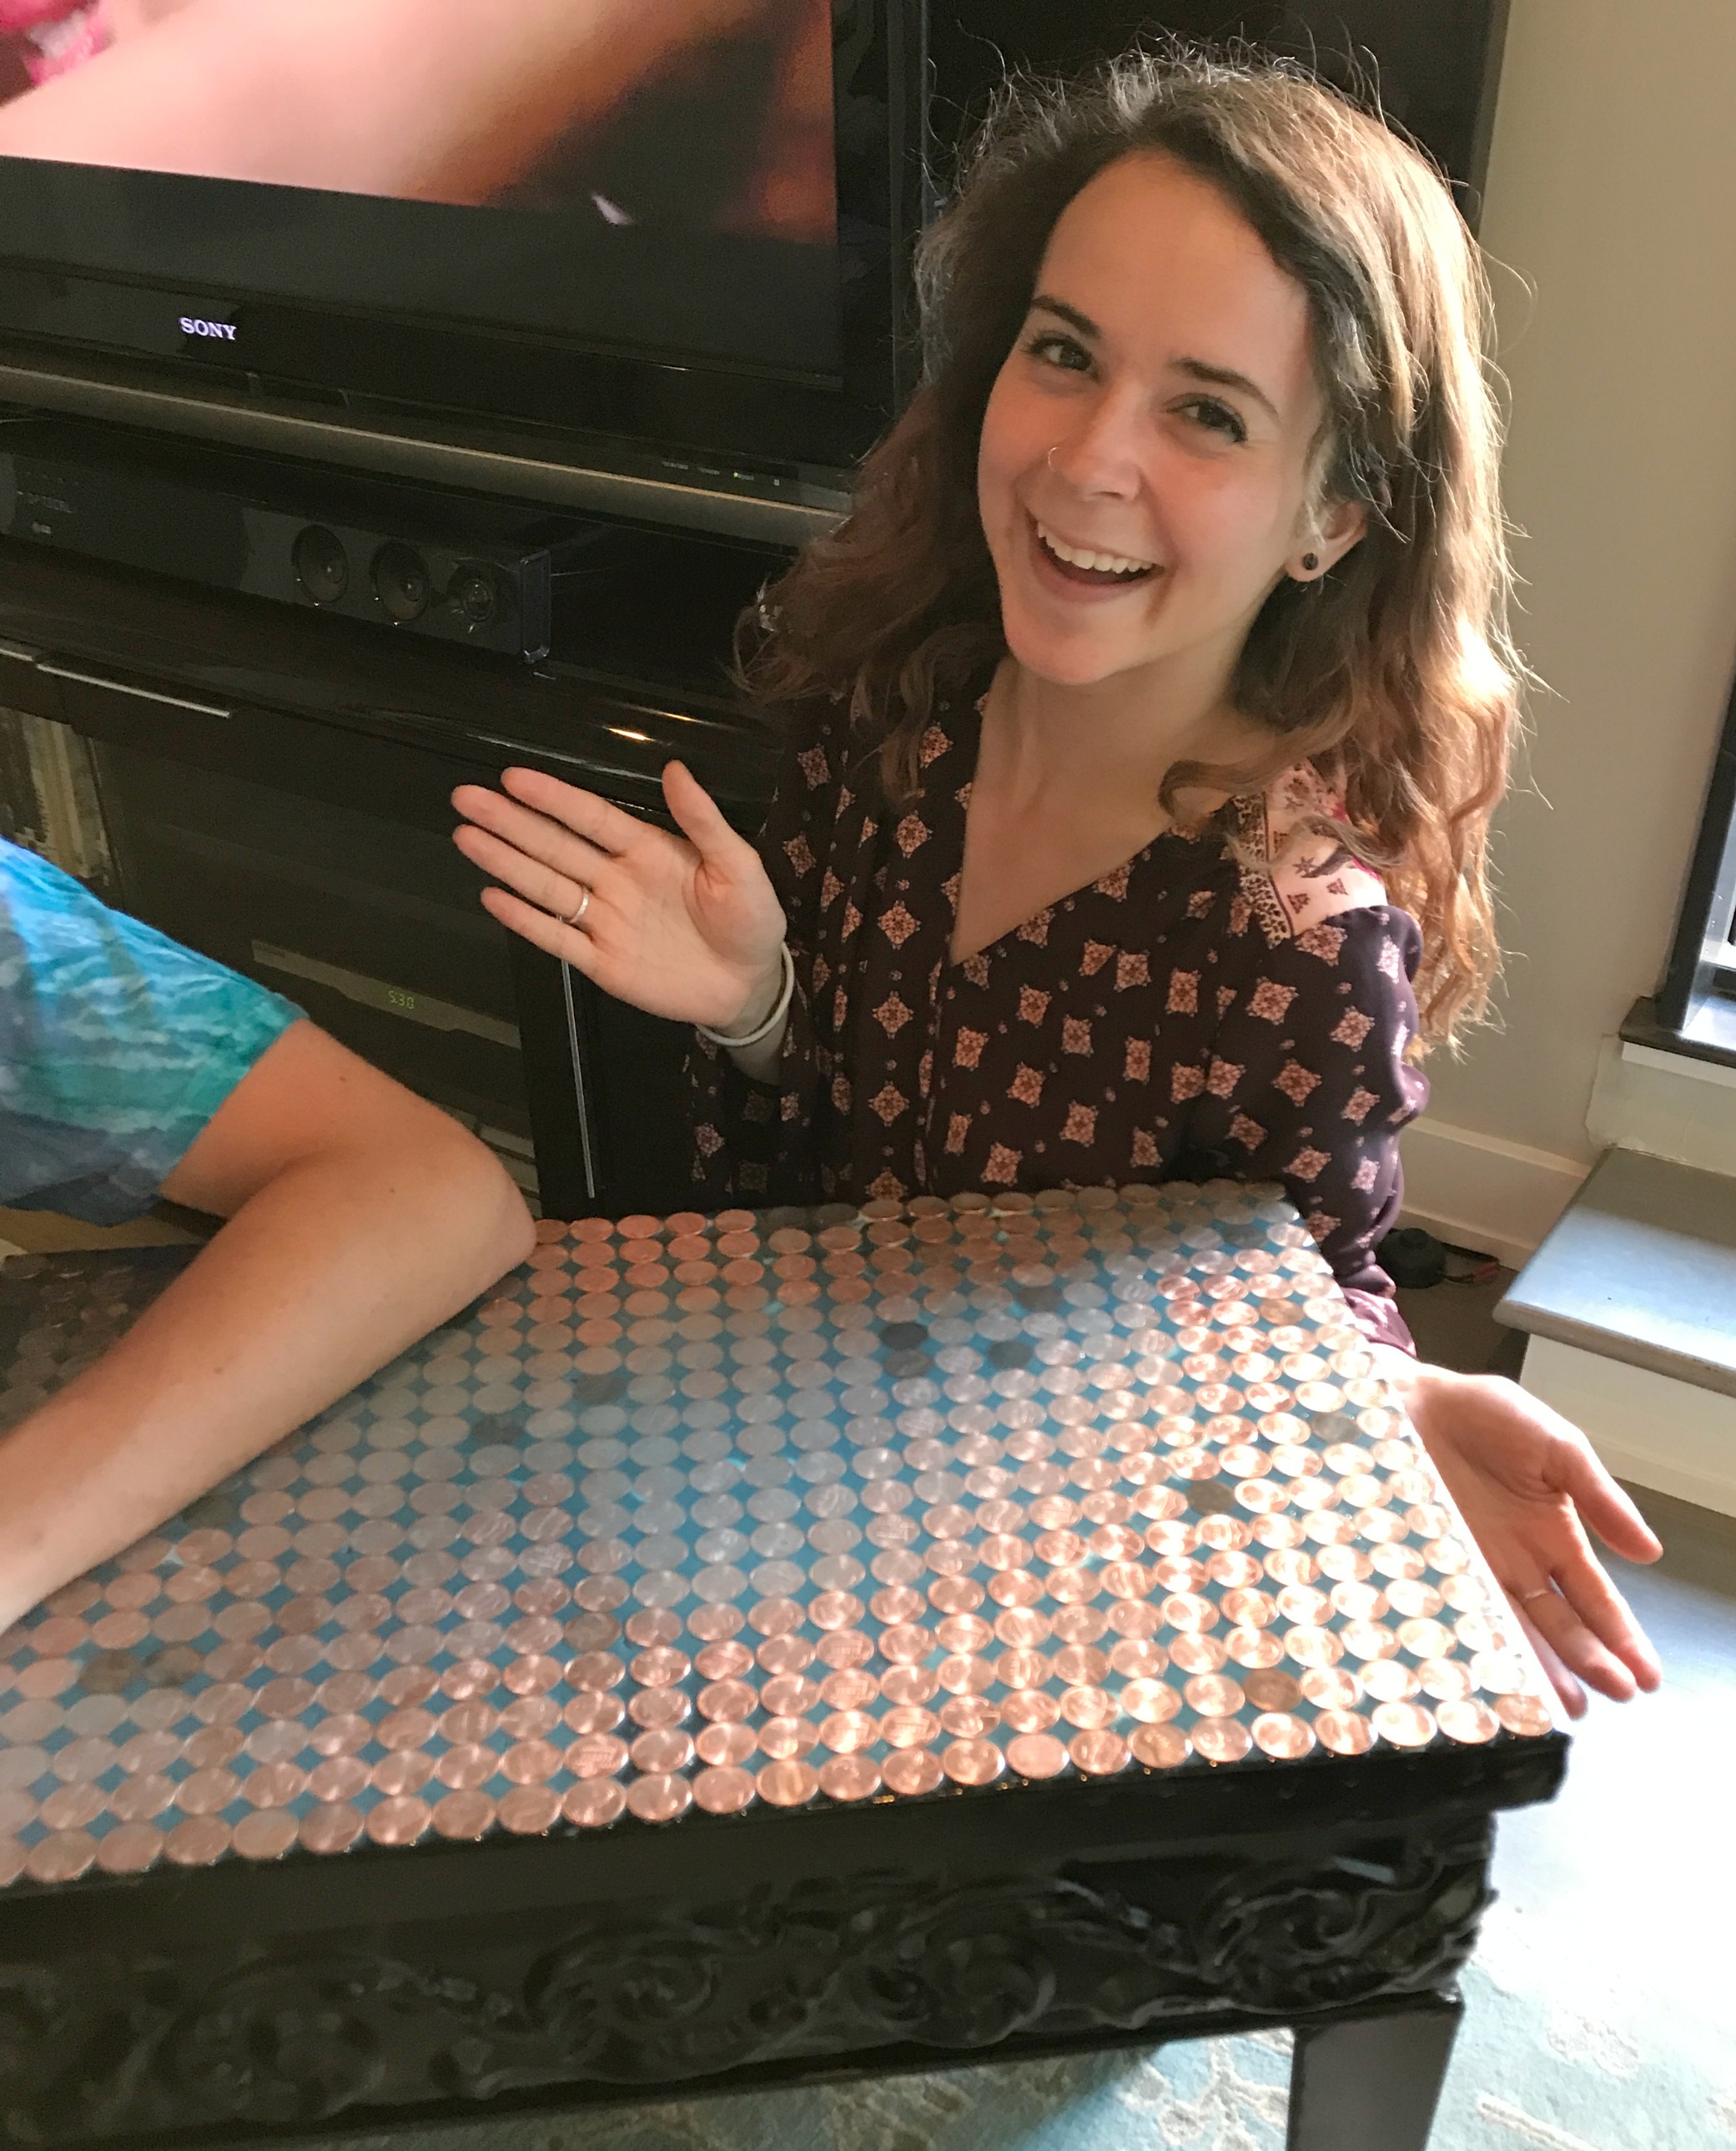 penny topped table upcycle - My French Twist